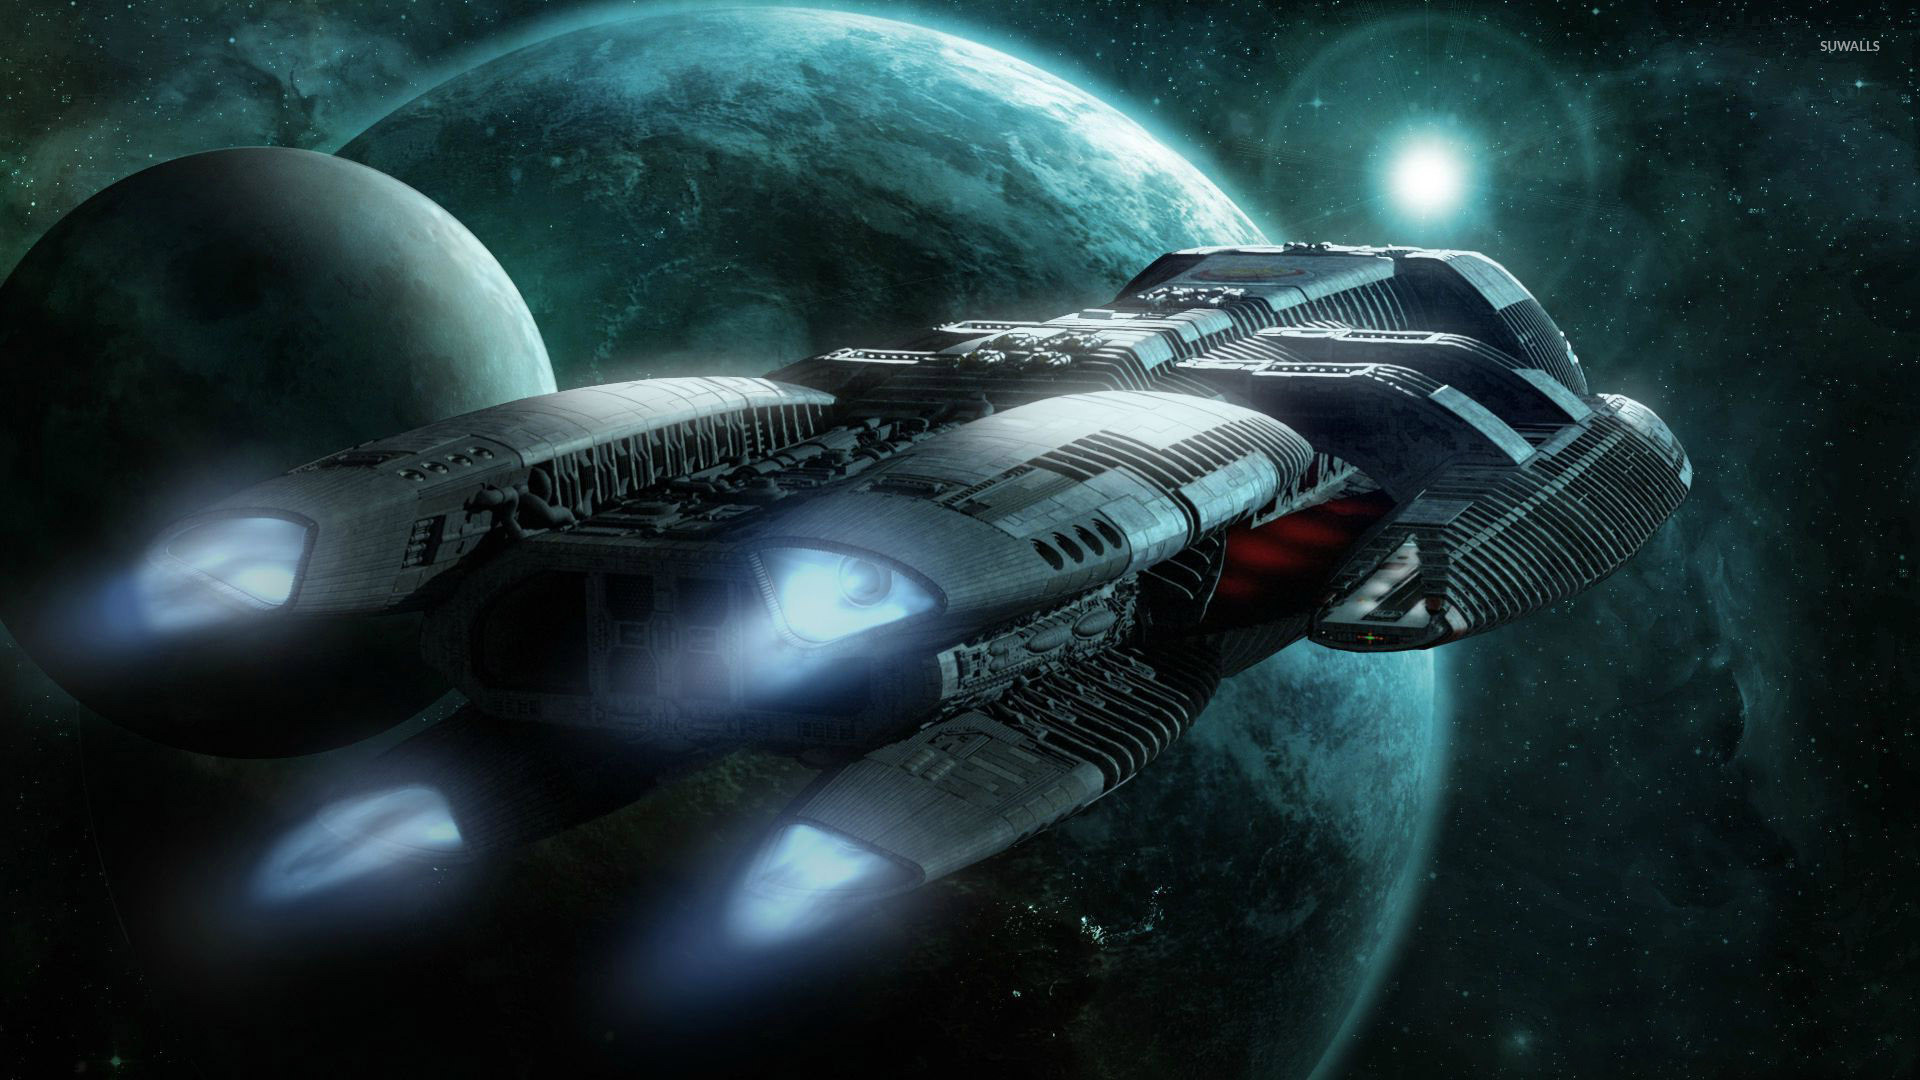 Free Download 66 Battlestar Galactica Wallpapers On Wallpaperplay 1920x1080 For Your Desktop Mobile Tablet Explore 65 Battlestar Galactica Wallpaper Battlestar Galactica Wallpapers And Screensavers Battlestar Galactica Wallpaper Images